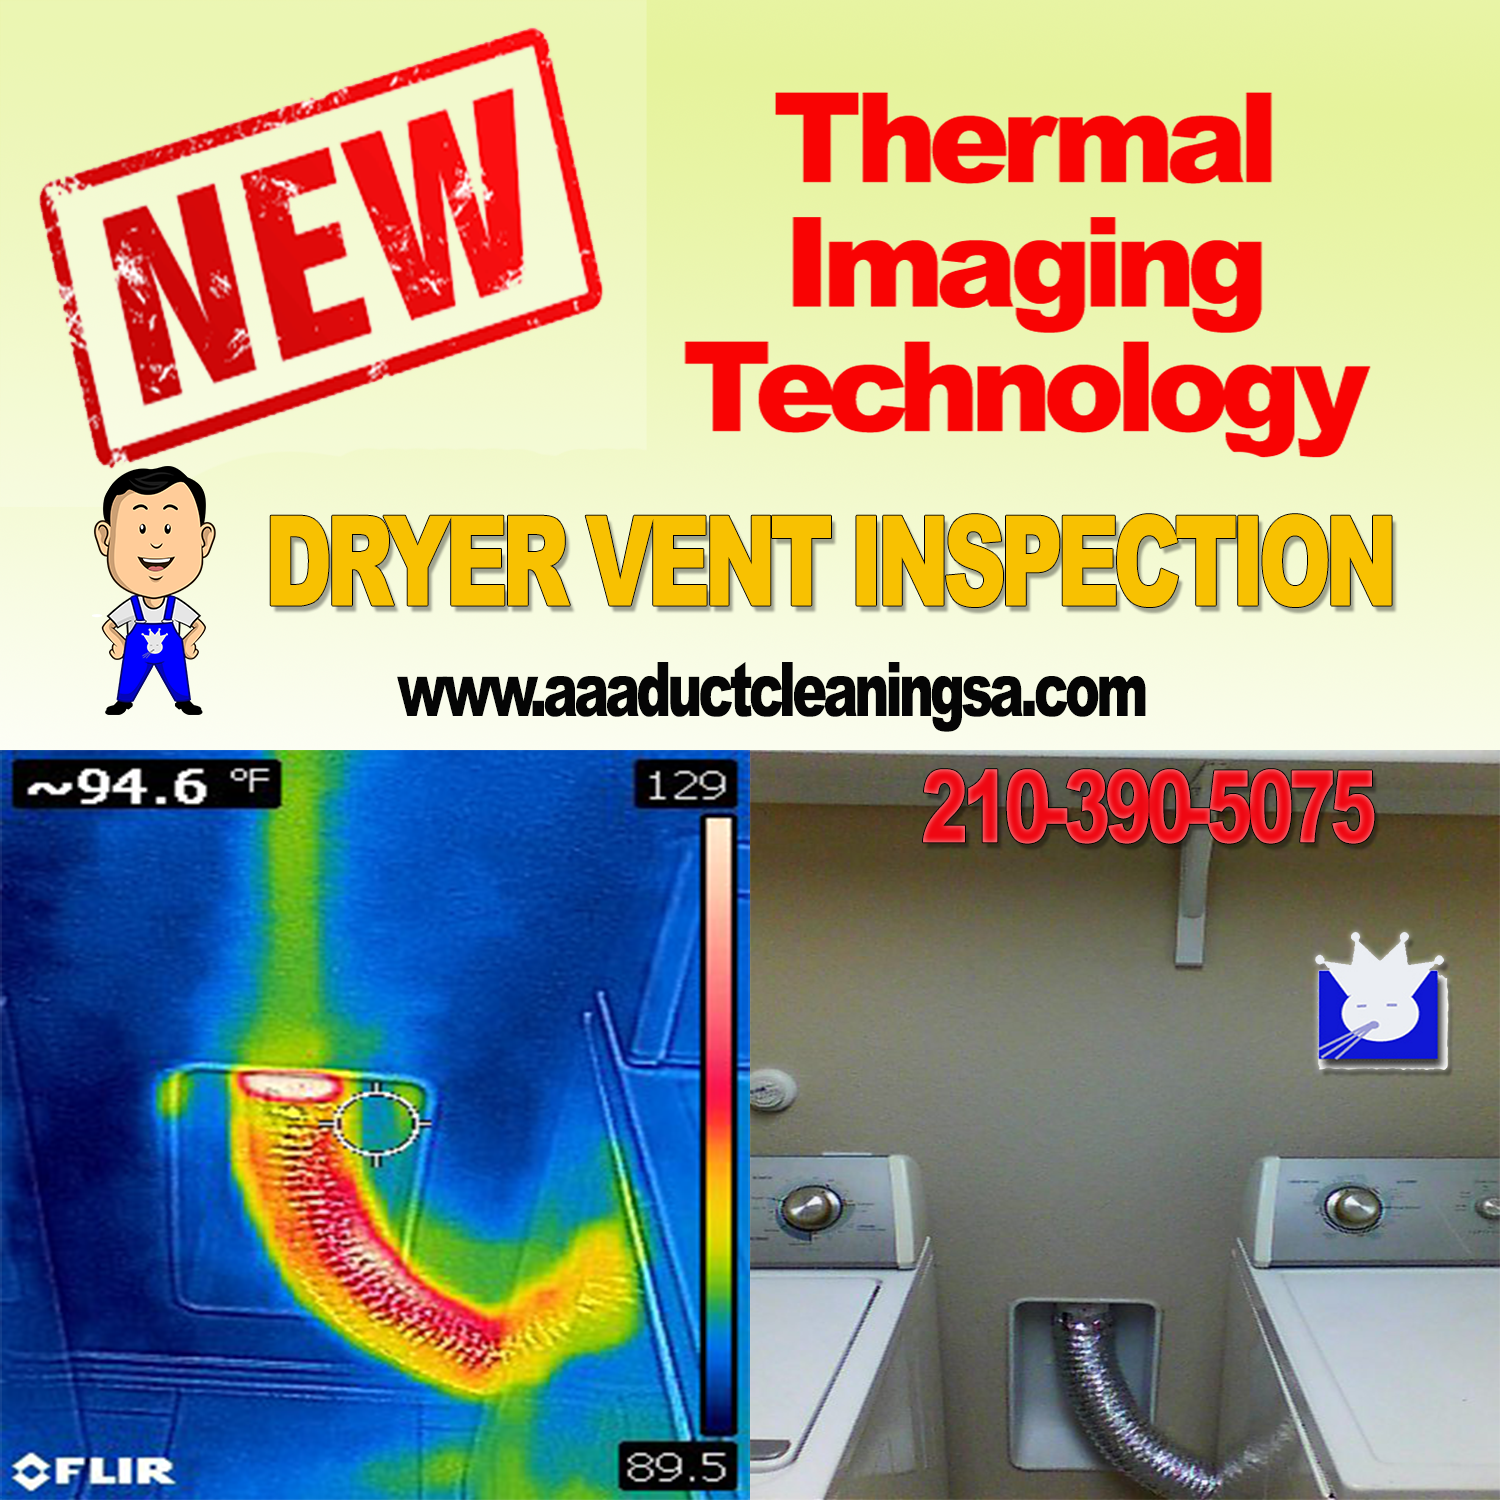 Dryer Vent Cleaning is a home maintenance task that needs to be done routinely San Antonio. AAA Duct Cleaning offers same day service for an affordable price and will thermal image your duct for free. Call today to schedule your duct cleaning or repair. 